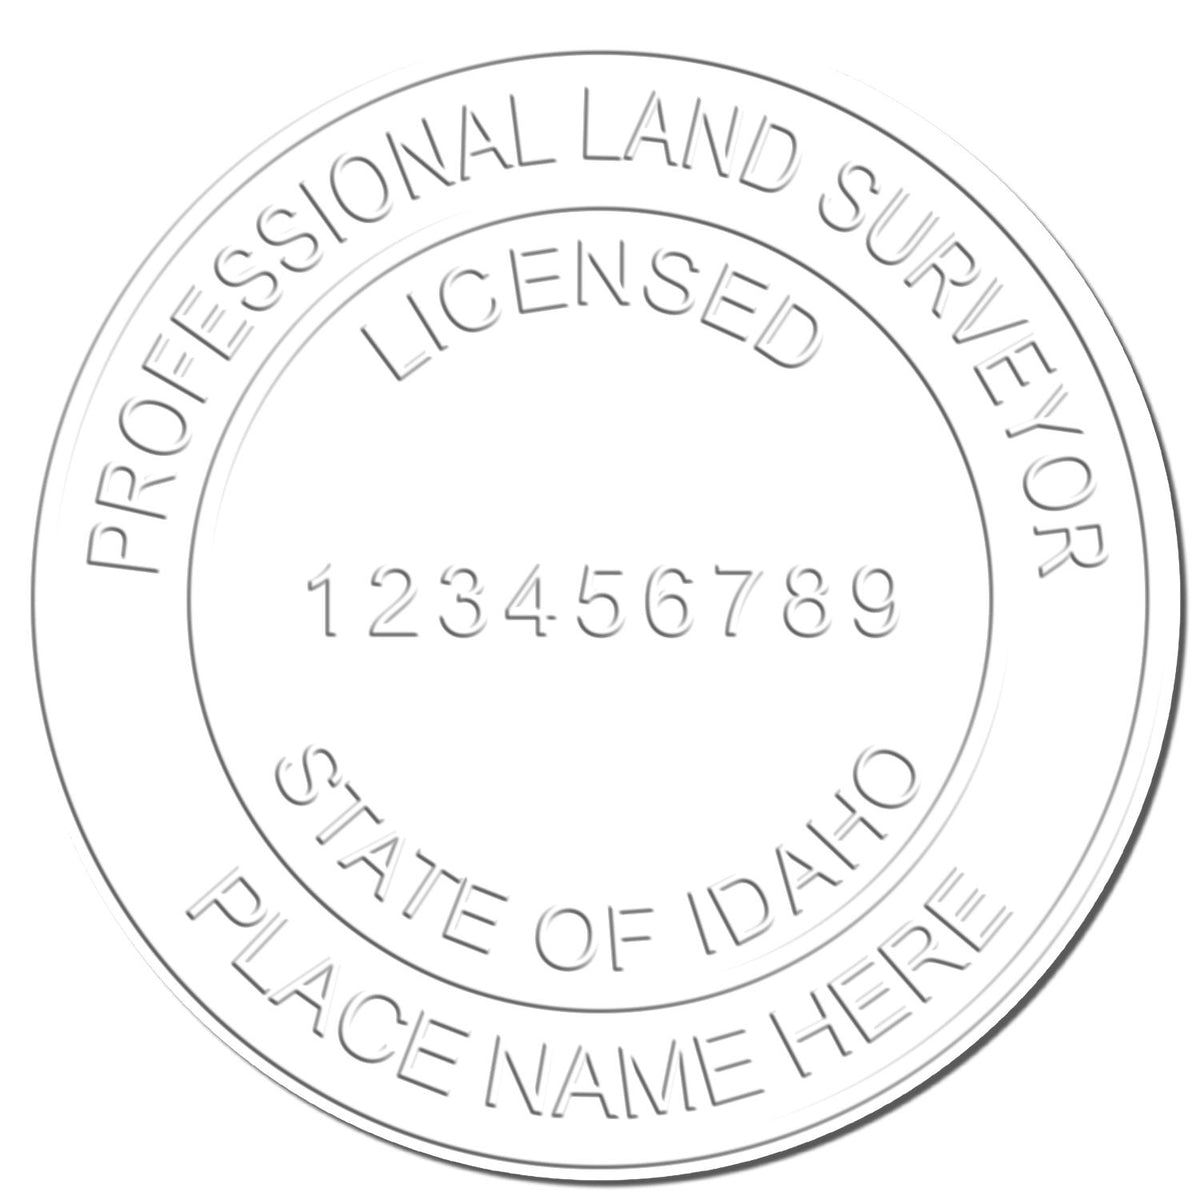 This paper is stamped with a sample imprint of the Gift Idaho Land Surveyor Seal, signifying its quality and reliability.